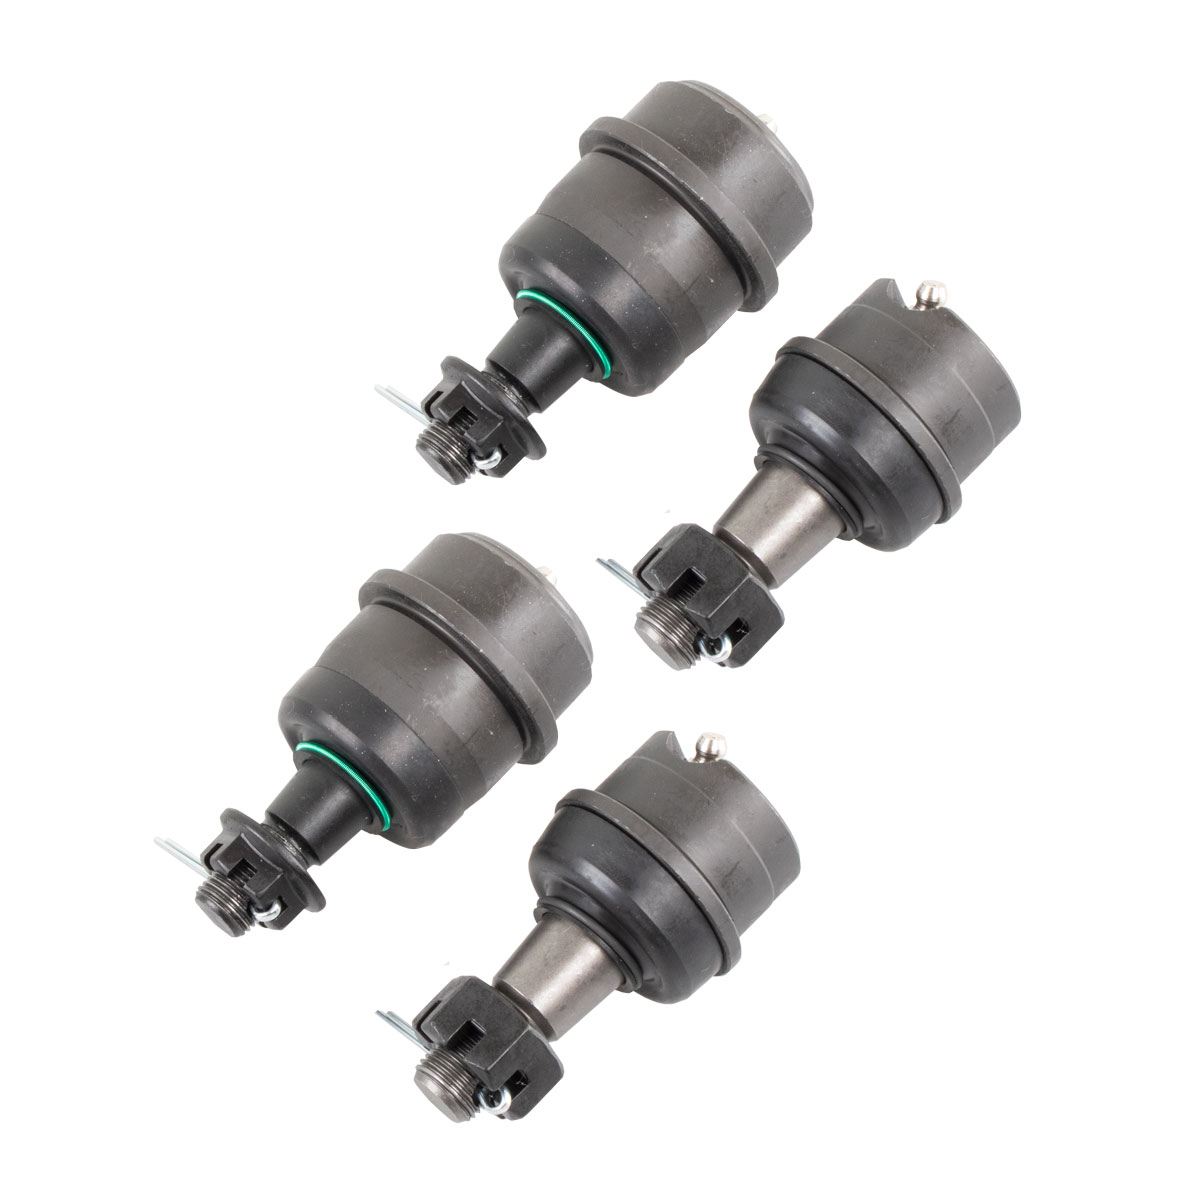 Synergy Manufacturing Non-Knurled HD Ball Joints - Set of 4 - JK/WJ